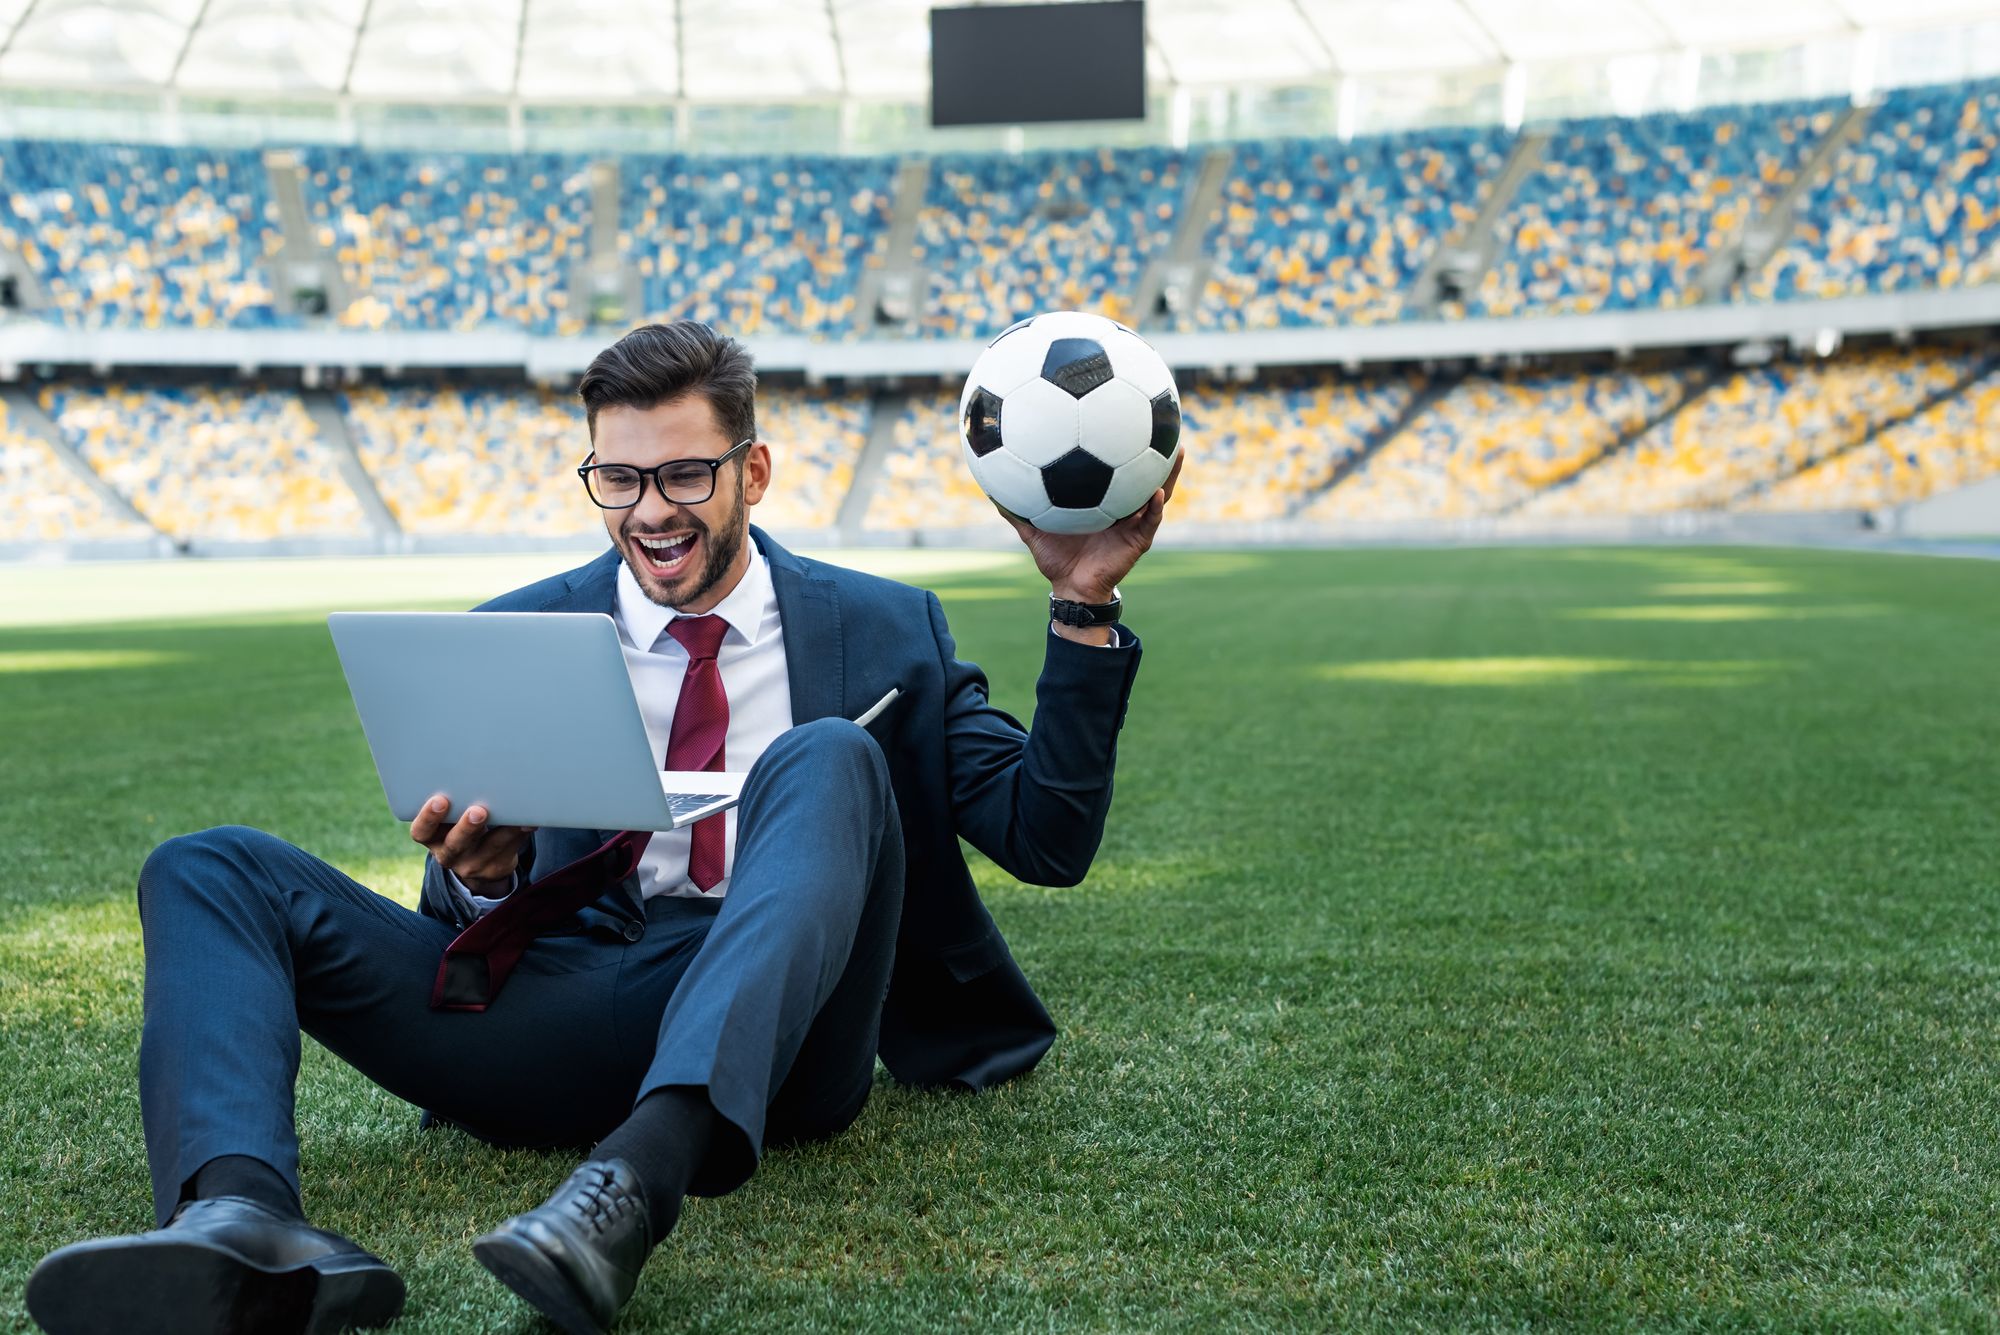 New to Sports Betting? Here are Some Important Things to Keep in Consideration